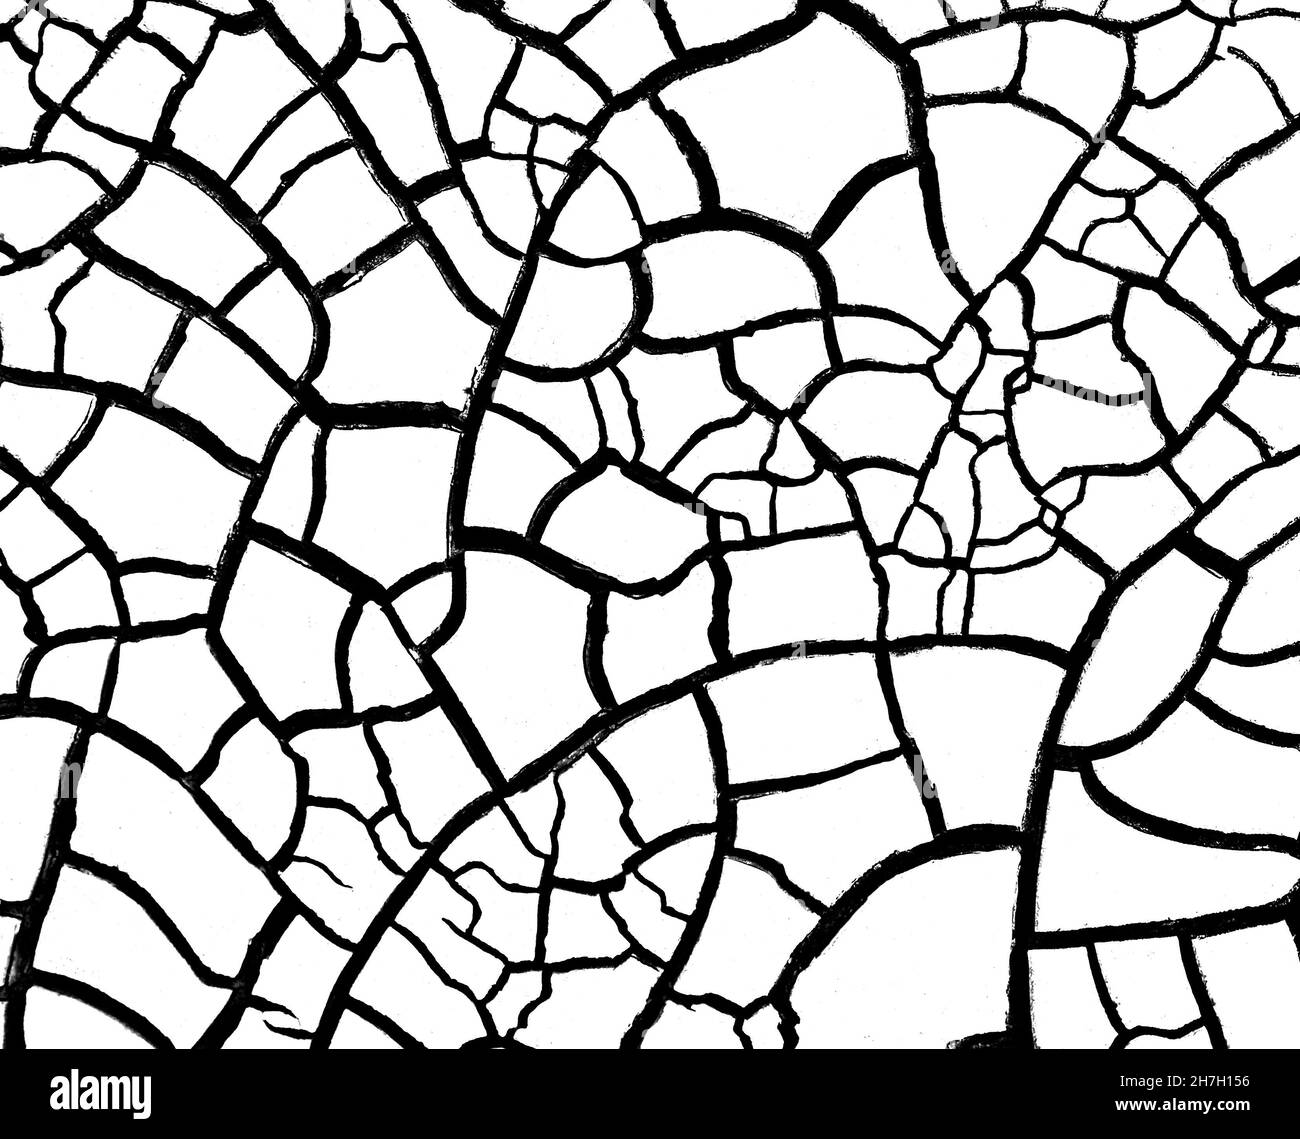 Cracked clay, natural texture black and white overlay Stock Photo